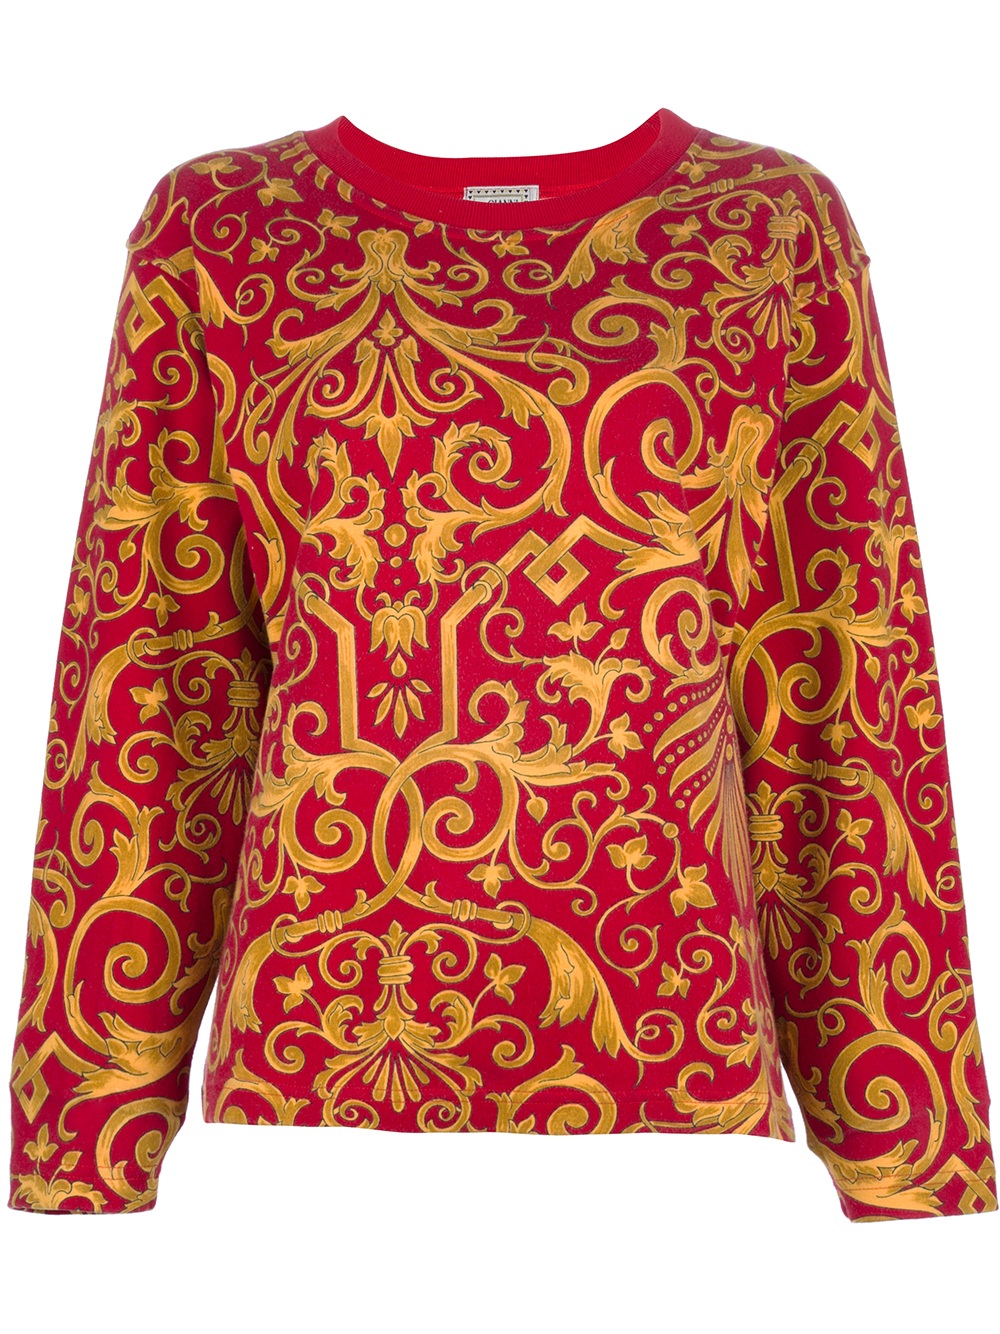 Gianni Versace Vintage Baroque Print Top in Red | Lyst